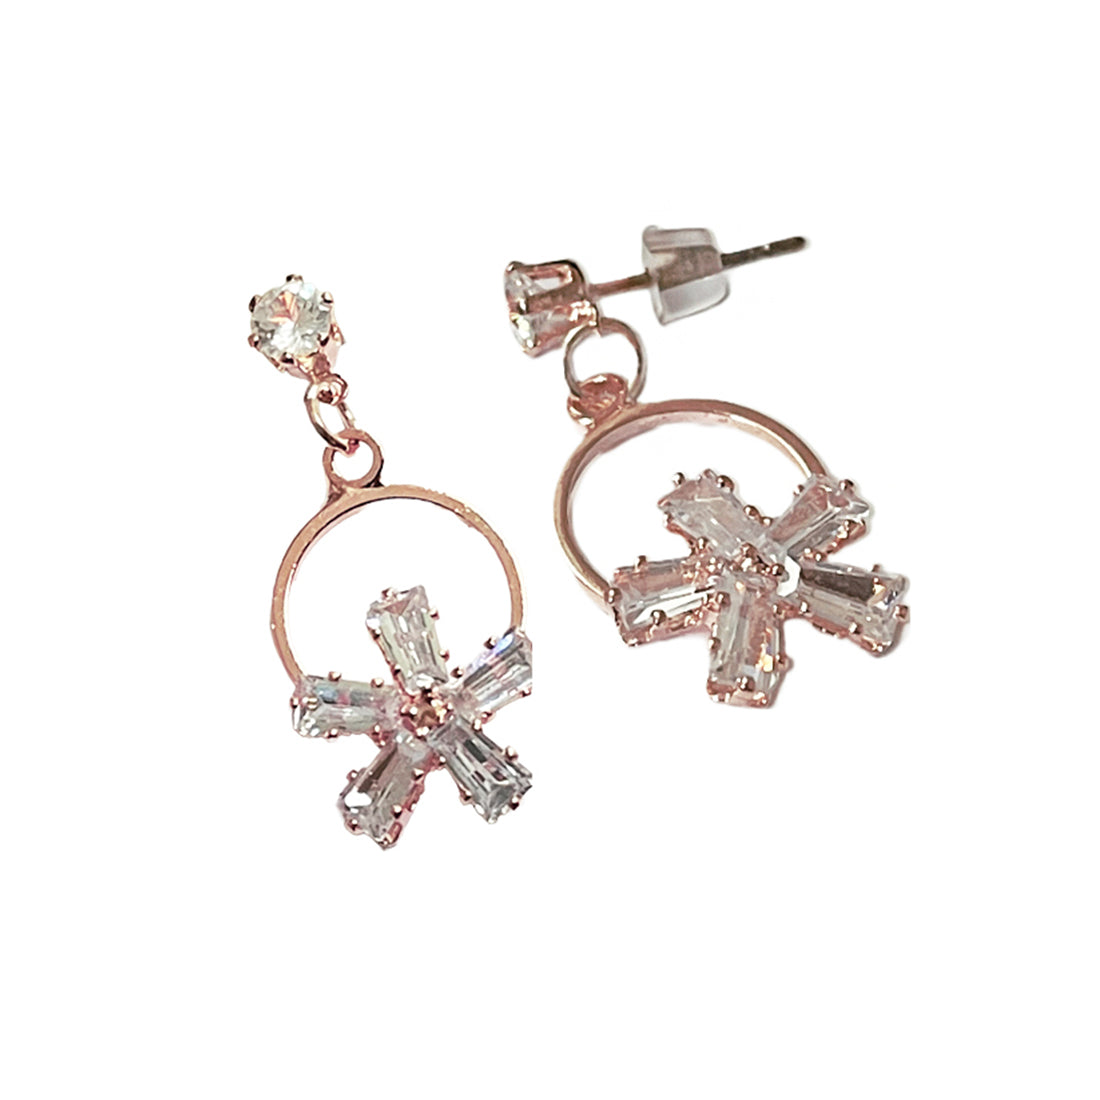 CONTEMPORARY RHINESTONE STUDDED ROSE-GOLD TONED FLOWER DROP EARRINGS